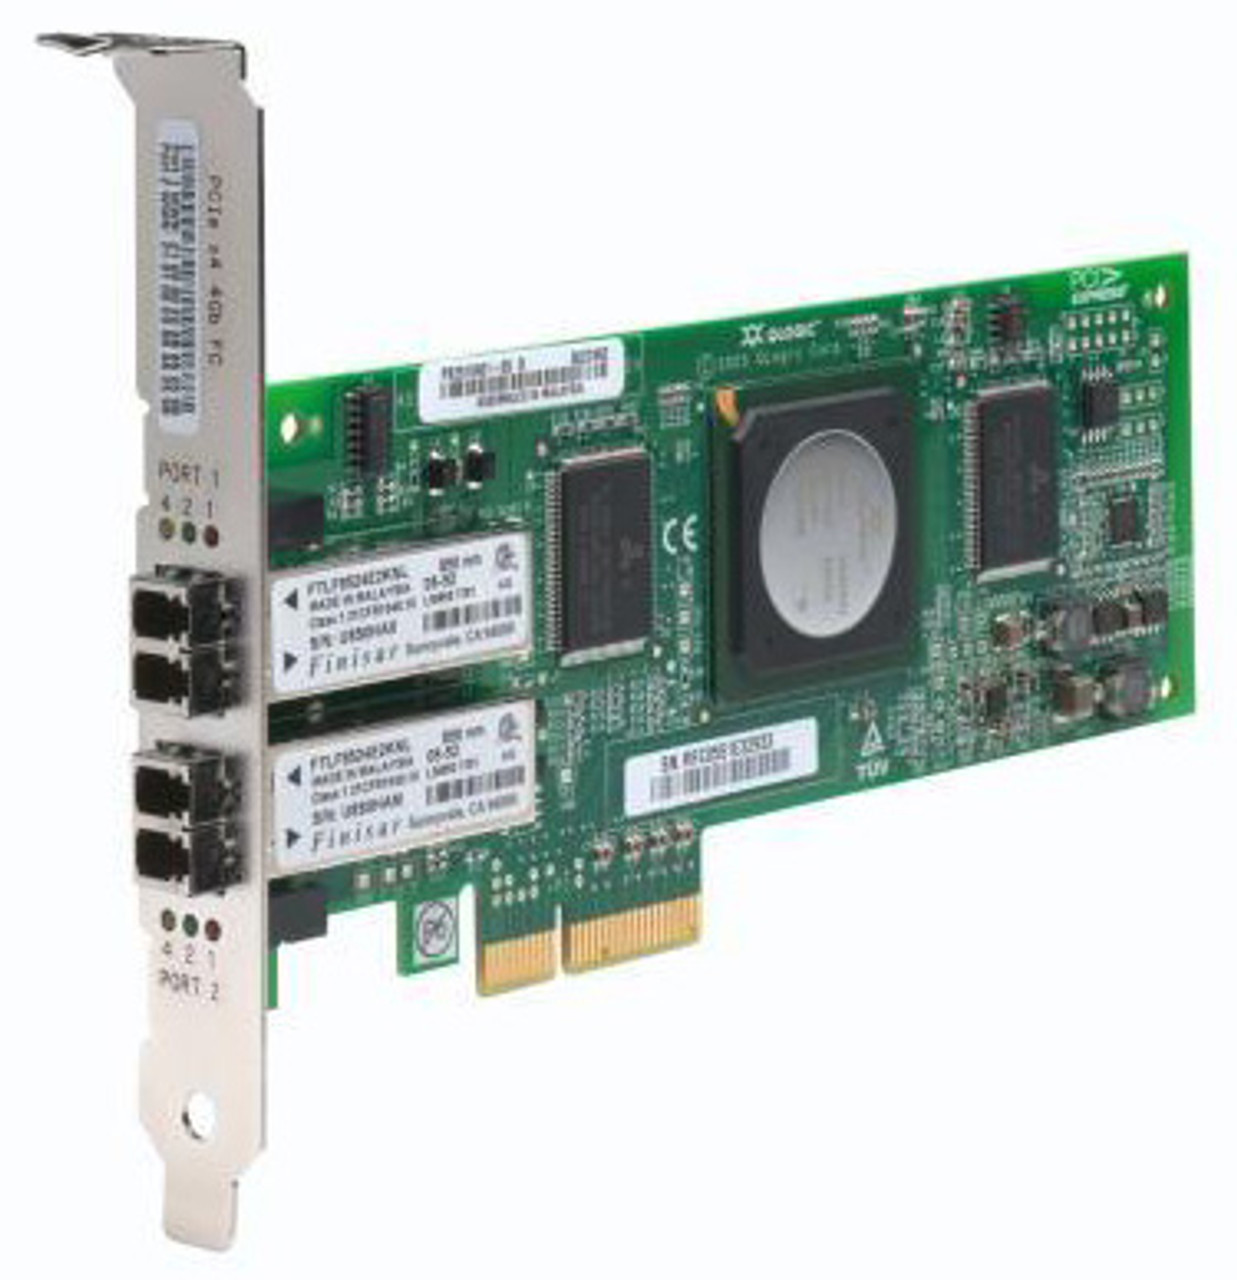 PX2510401-54 - Dell QLE2462 4GB Dual Port PCI-Express Fibre Channel Host Bus Adapter with Standard Bracket Card